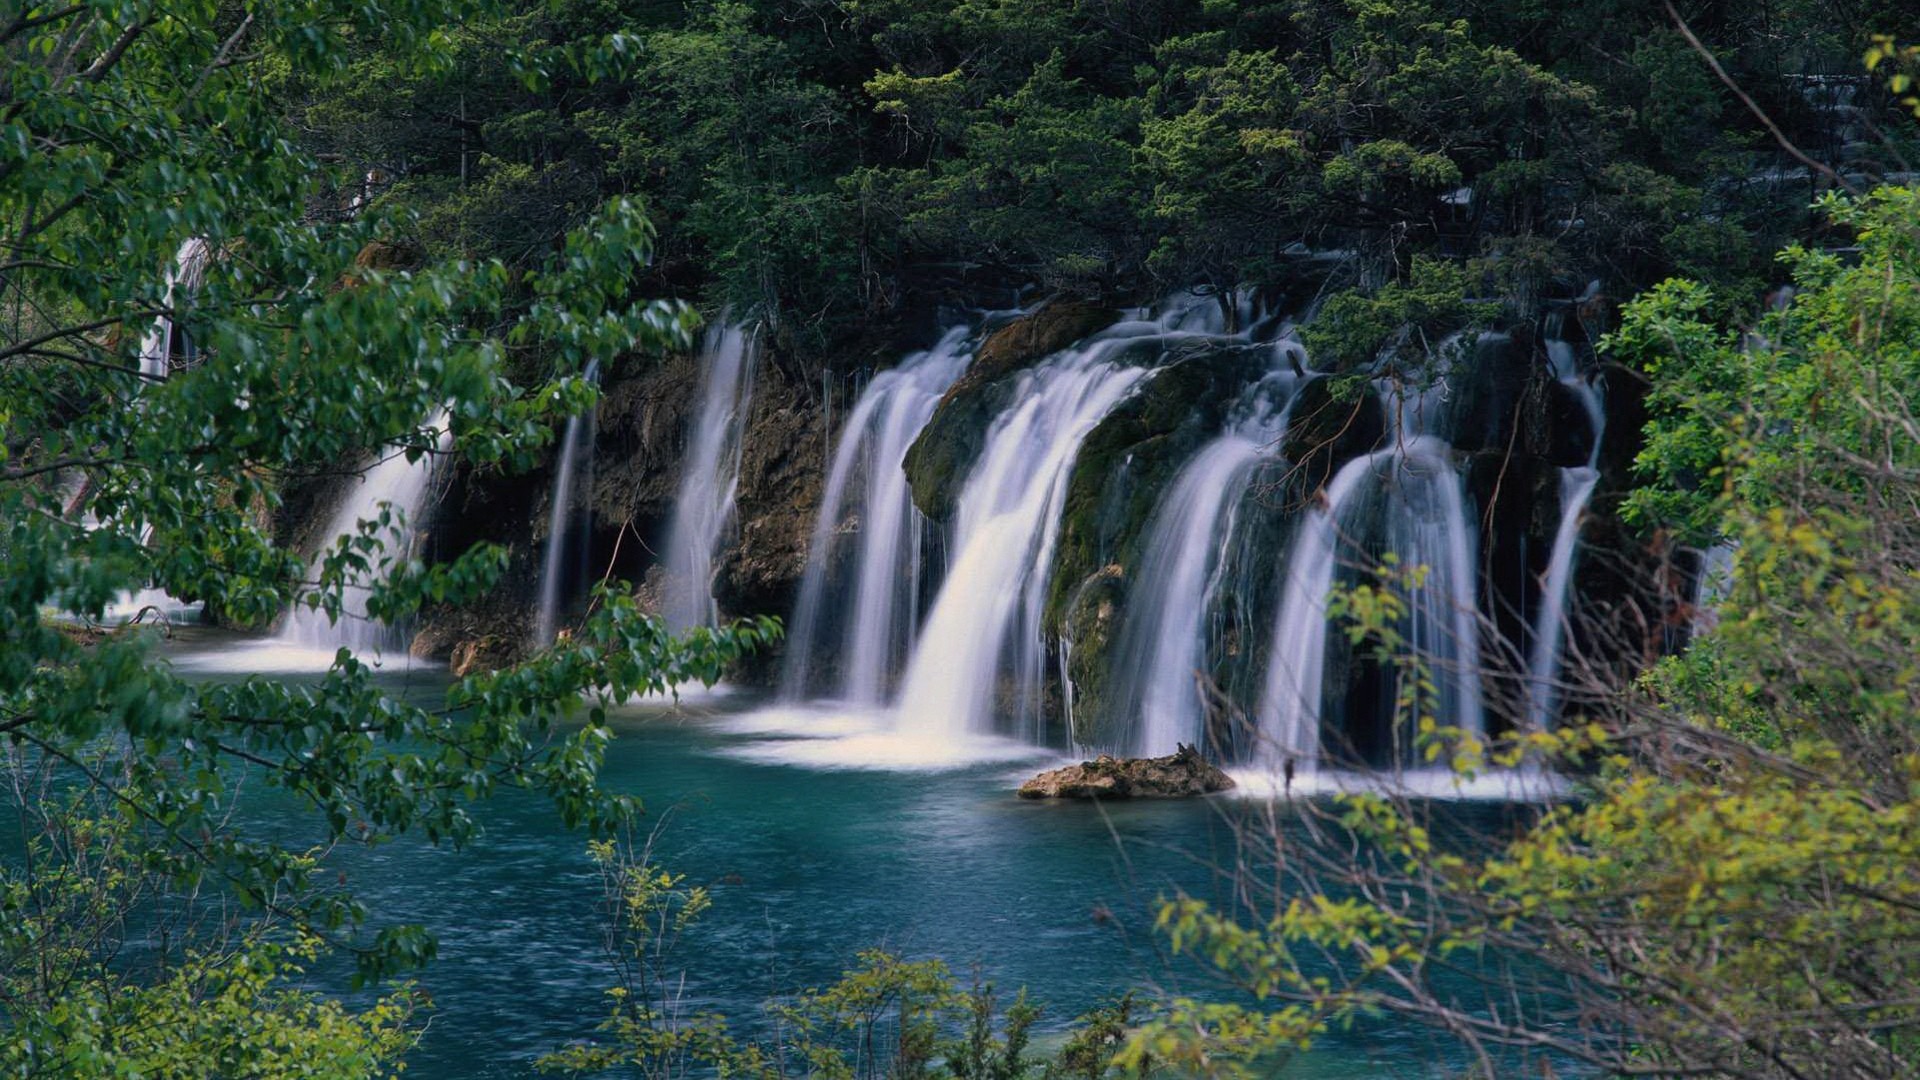 General 1920x1080 waterfall forest wilderness Plitvice Lakes National Park nature Croatia